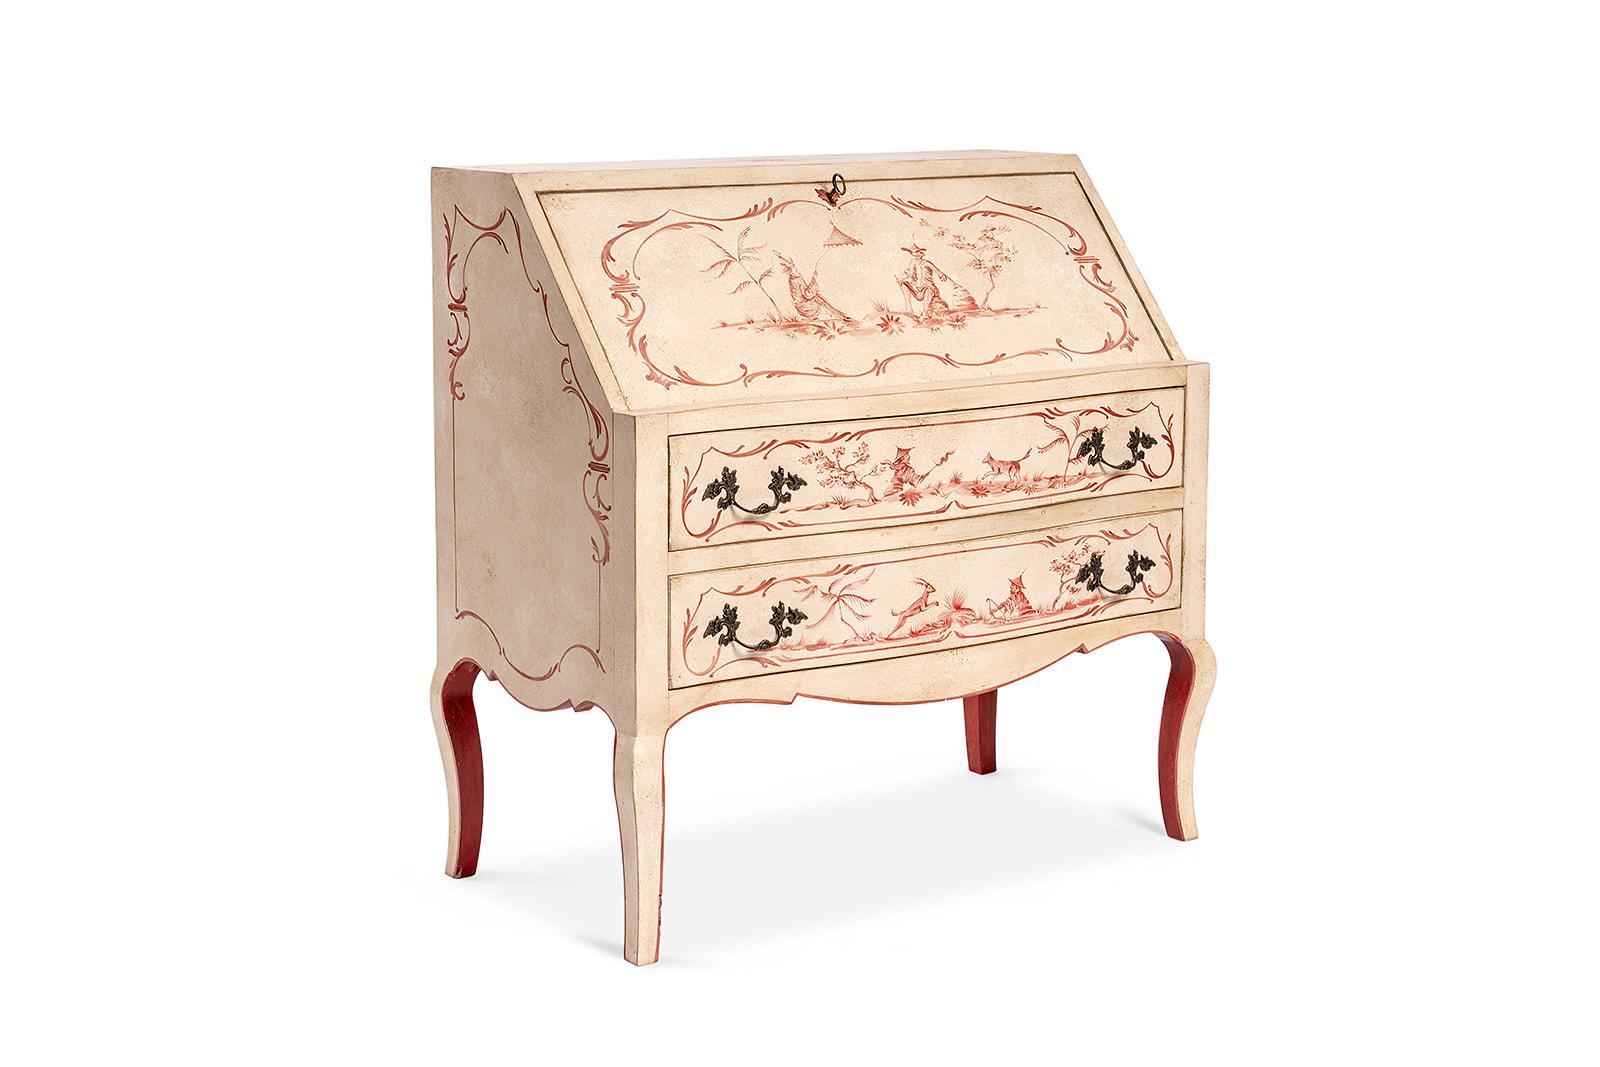 18th Century Hand-Painted Venetian Style Doge Bureau with Red Chinoiserie In New Condition For Sale In Ronchi dei Legionari, IT